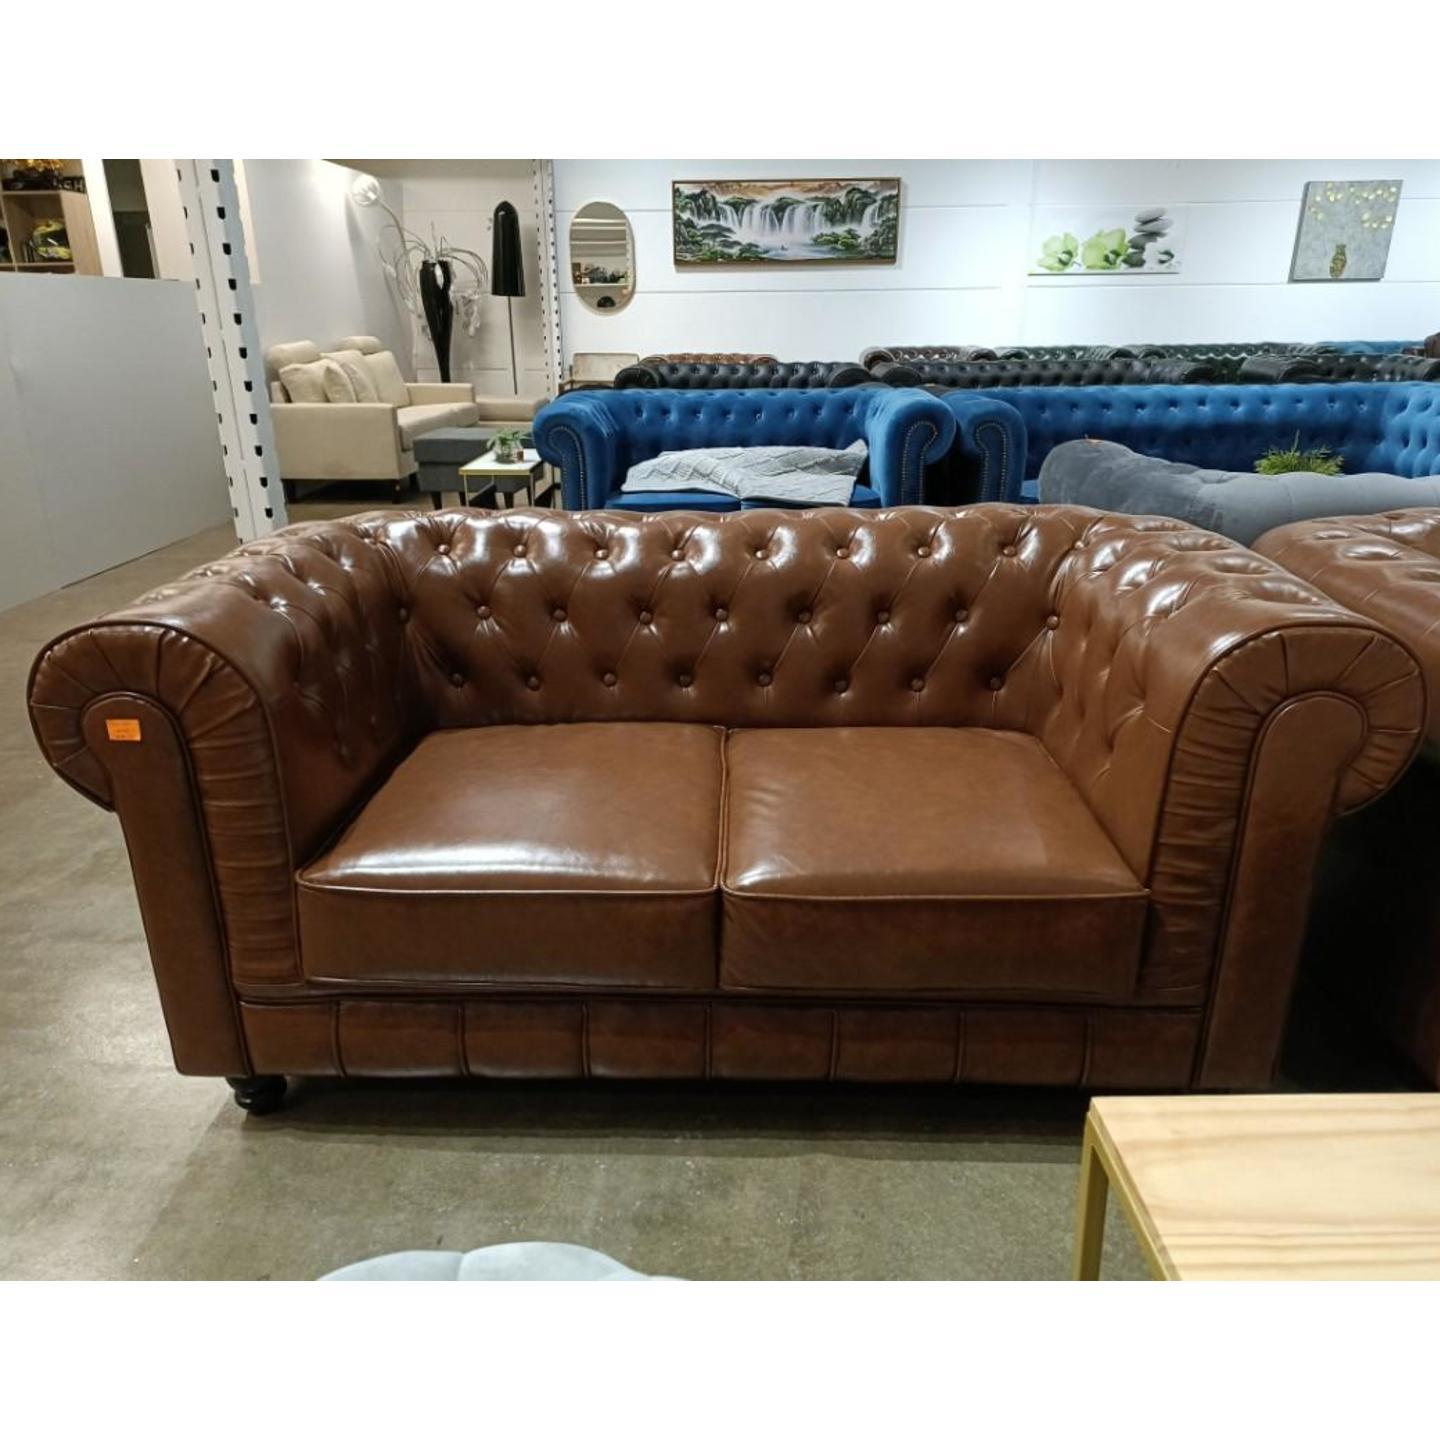 SALVADO II 2 Seater Chesterfield Sofa in CAMEL BROWN PU